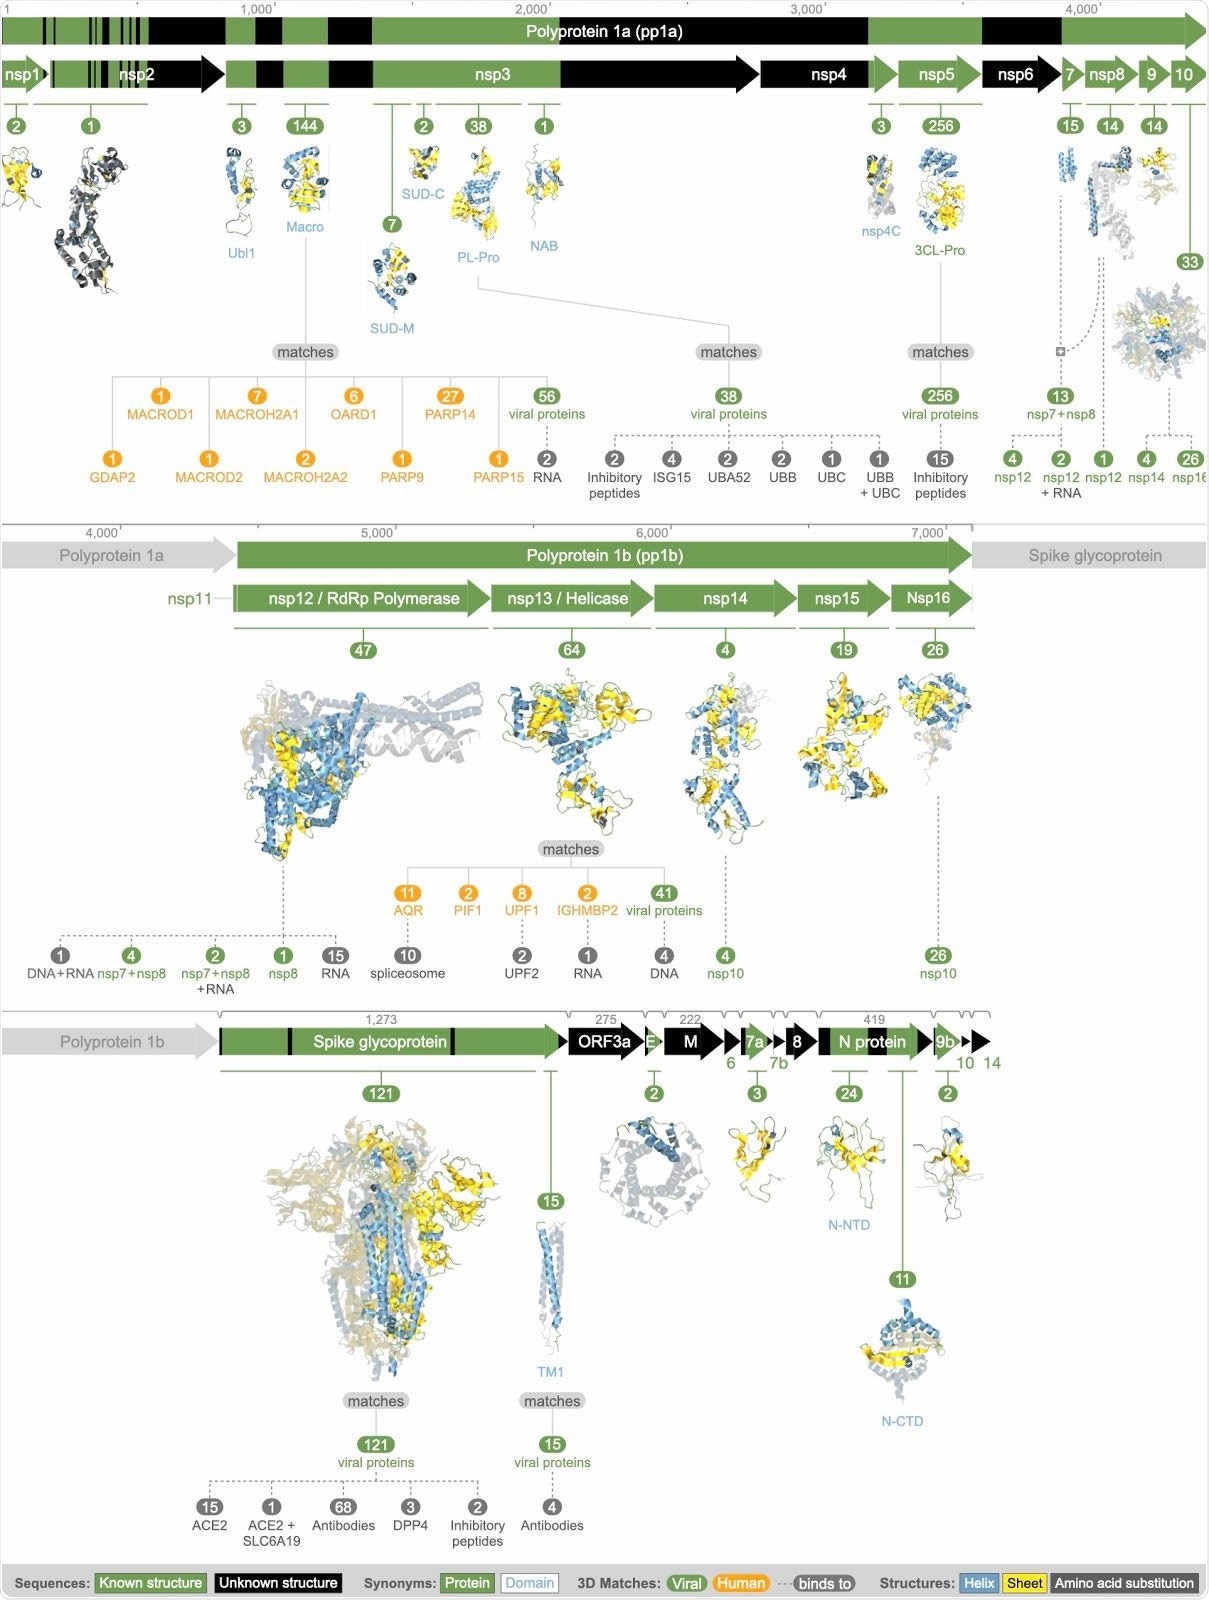 Summary of all available 3D molecular structural knowledge for the viral proteome, as well as derived mimicry, hijacking, and protein interactions.